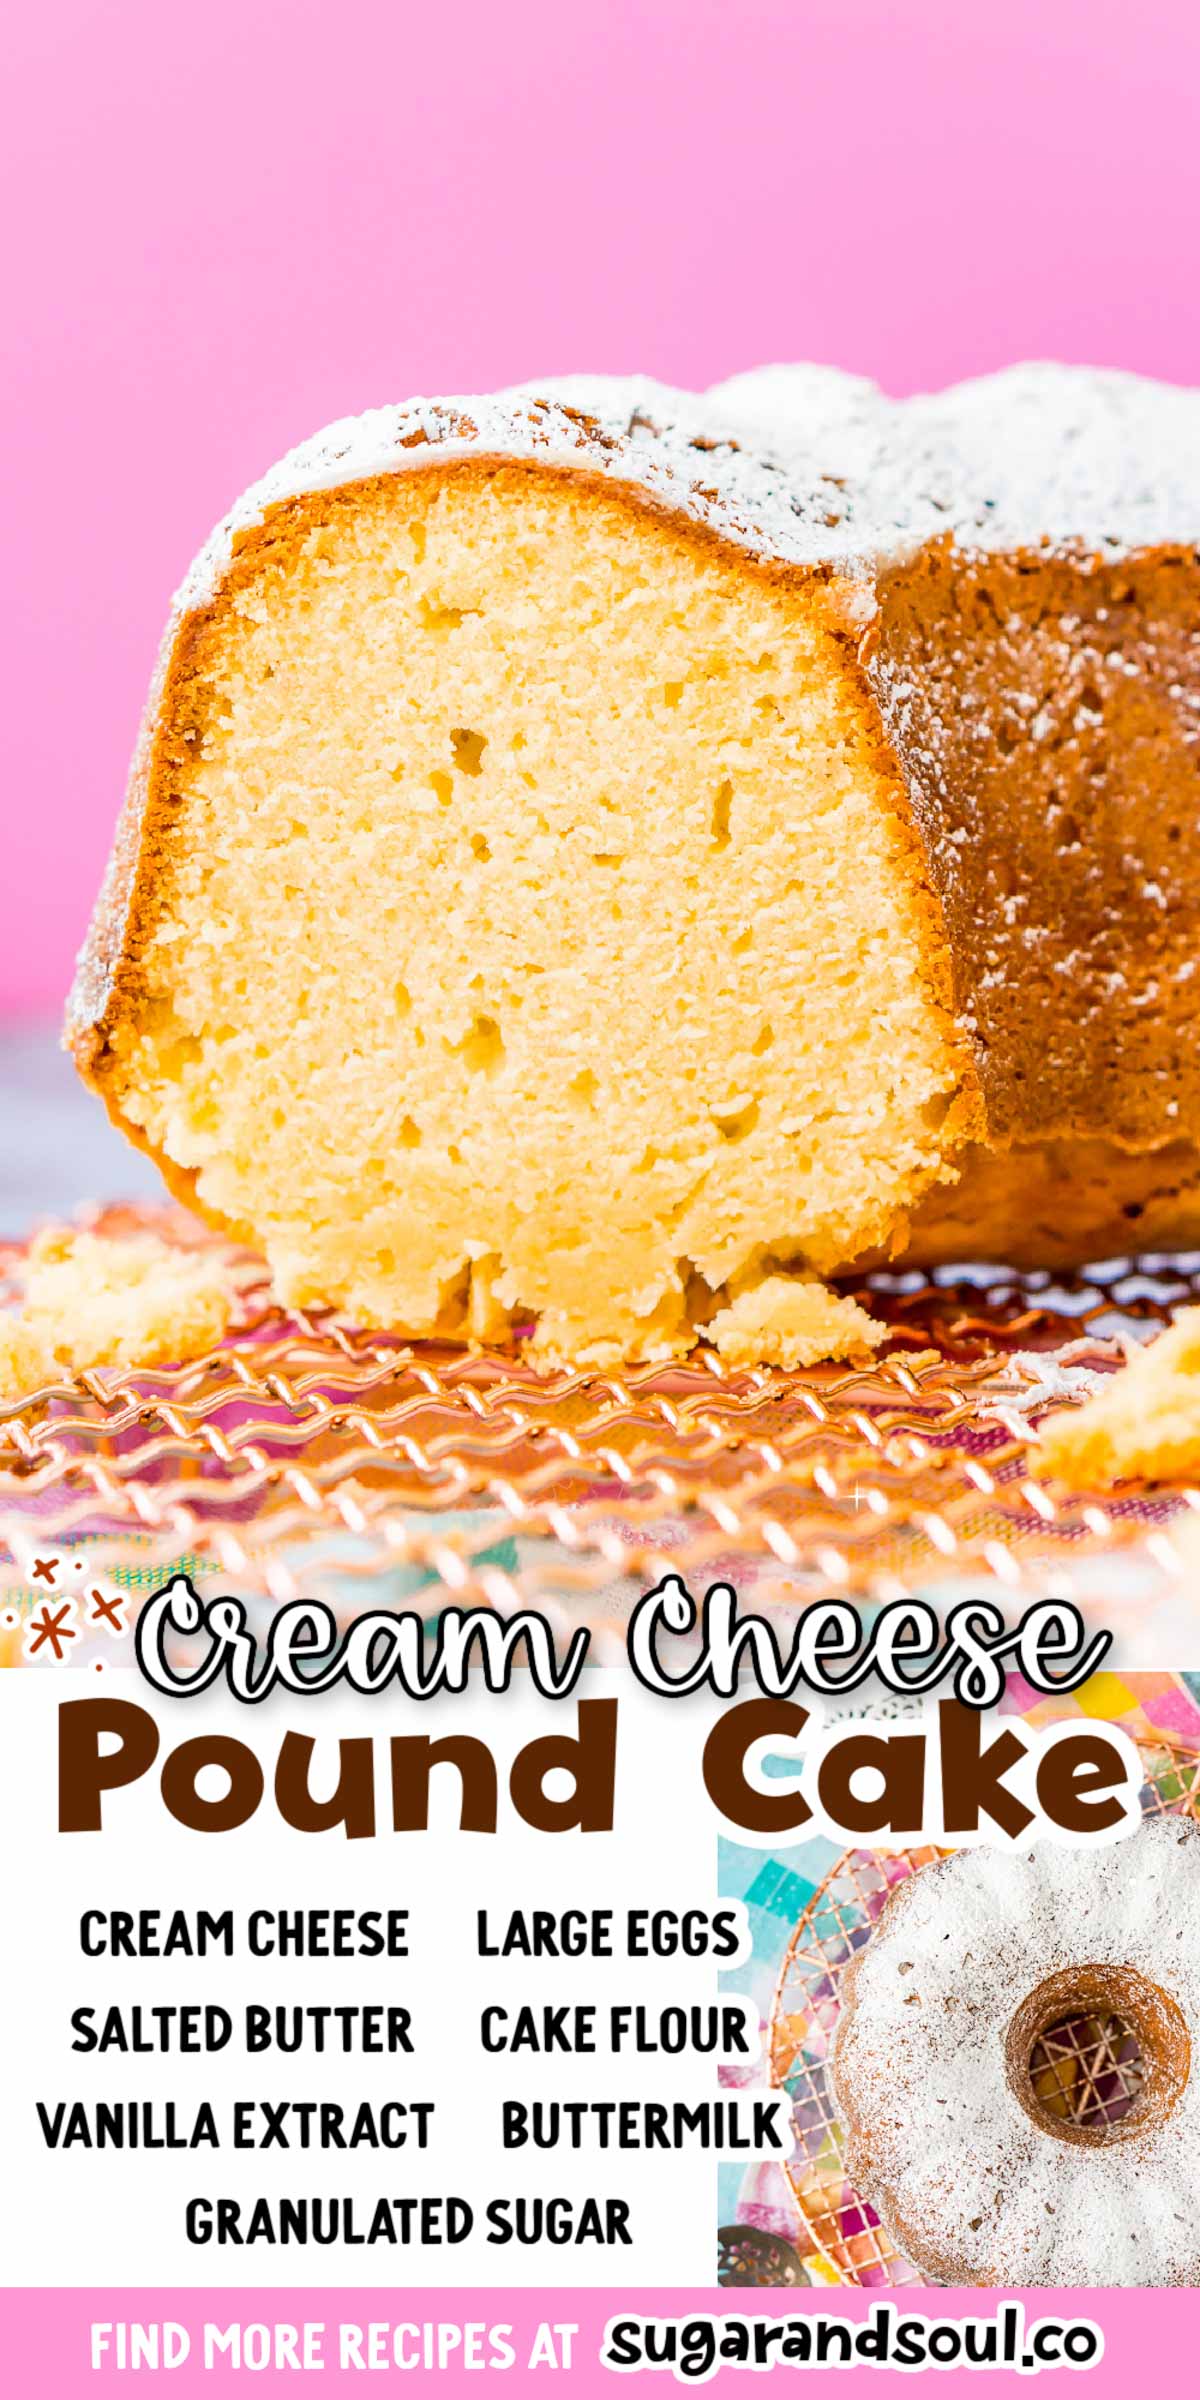 Cream Cheese Pound Cake is a slight twist on the classic recipe and is dense, sweet, and tender and the only pound cake recipe you will ever need! Serve it plain or with fresh fruit, whipped cream, or a homemade strawberry sauce or chocolate sauce! via @sugarandsoulco